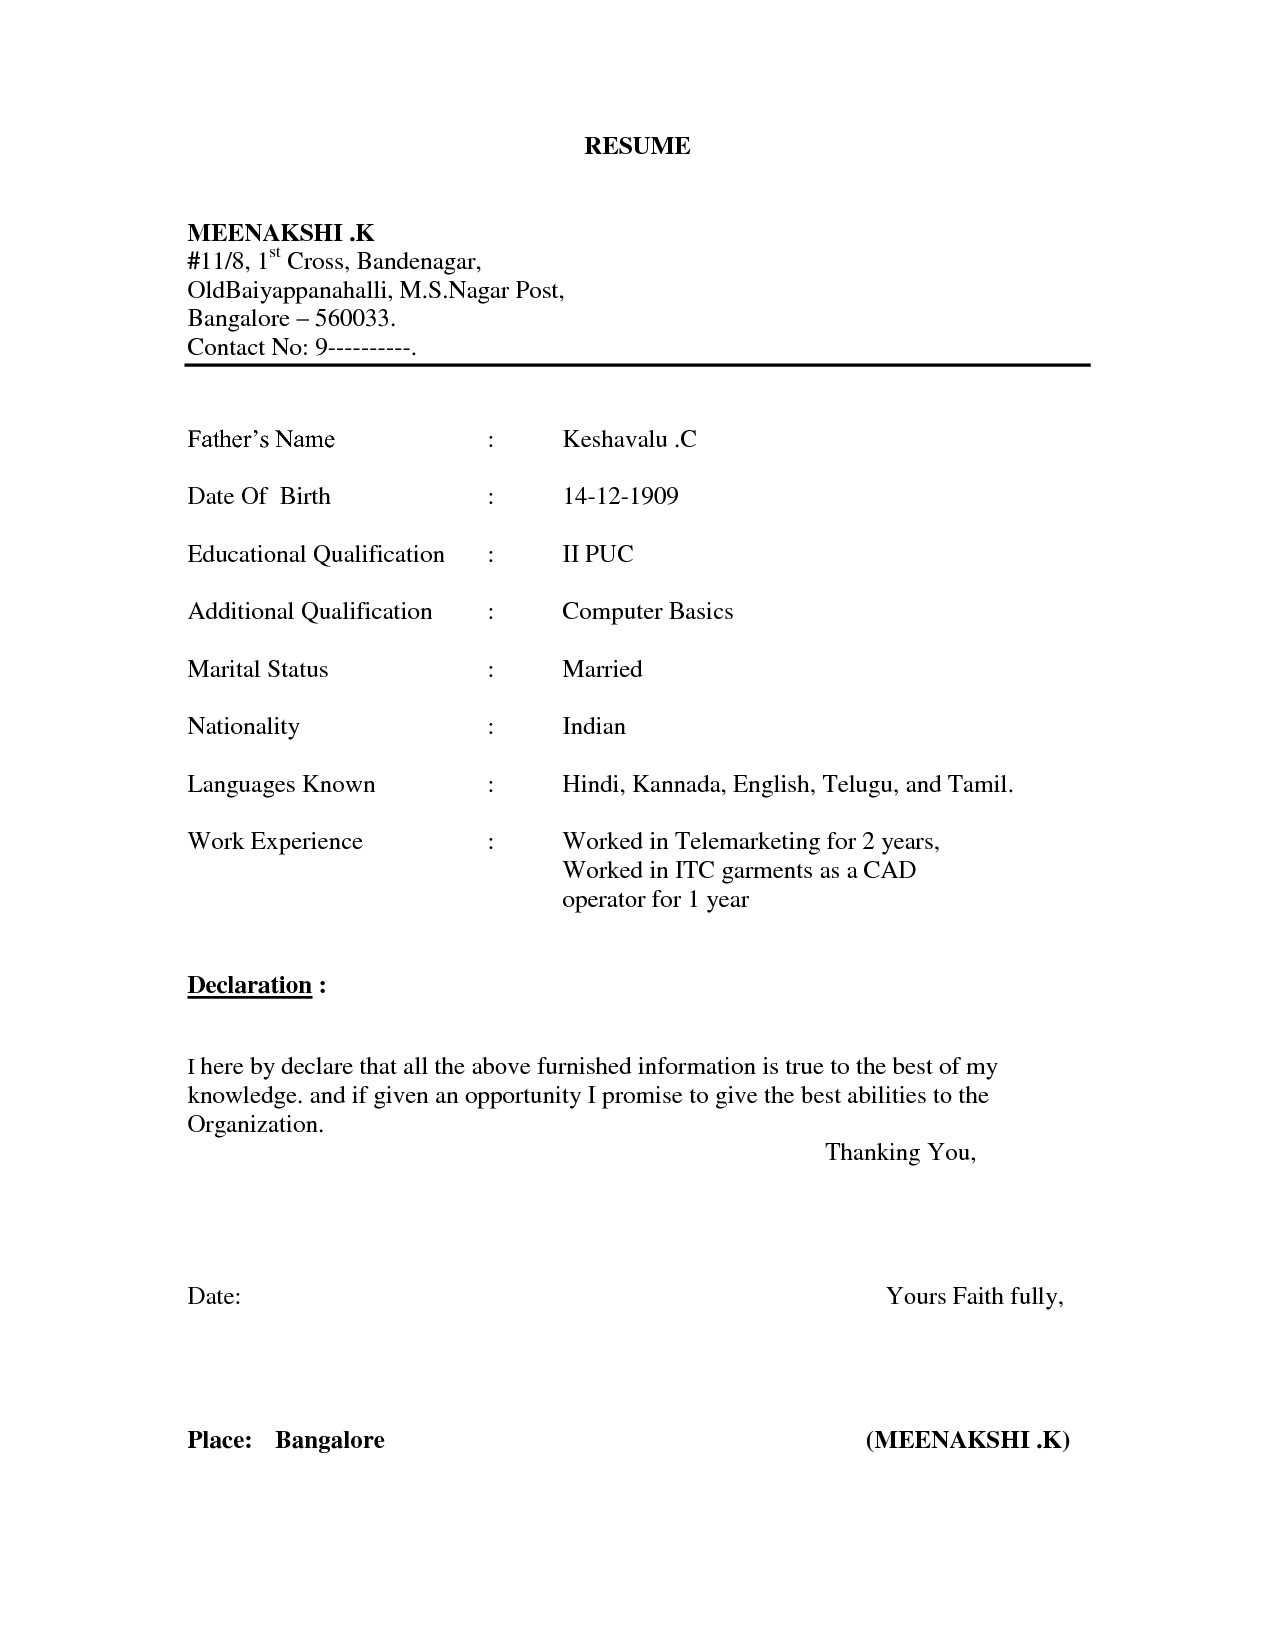 Resume ~ Veryimple Resume Examples Fortudents In With Simple Resume Template Microsoft Word